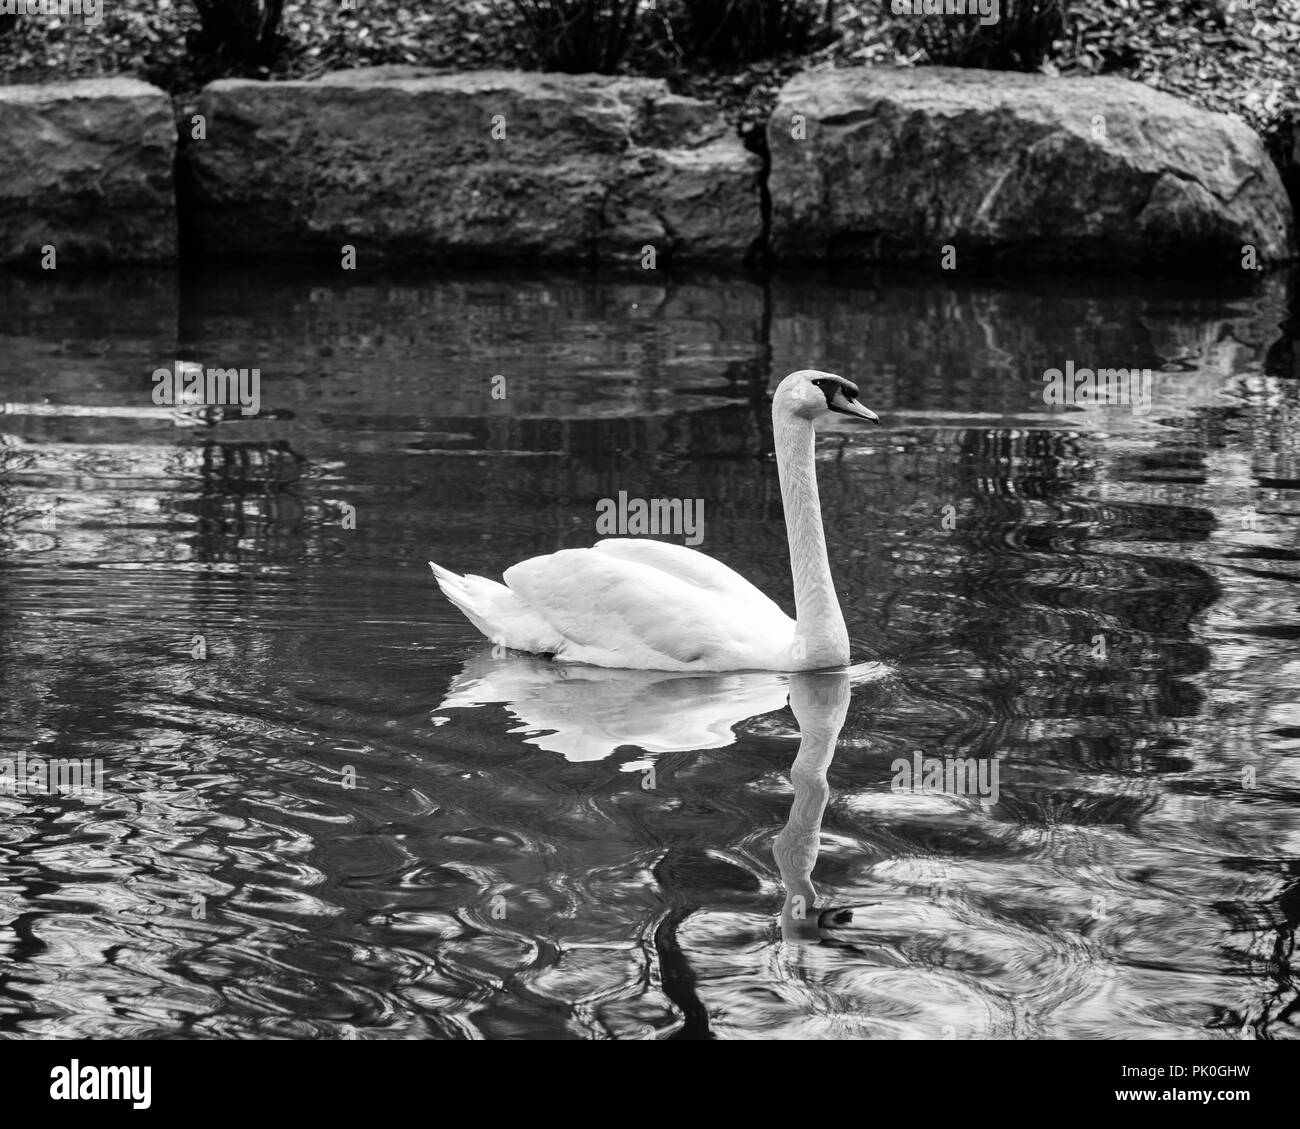 Mute Swan Swimming On A Pond With Rippling Water In Black And White Stock Photo